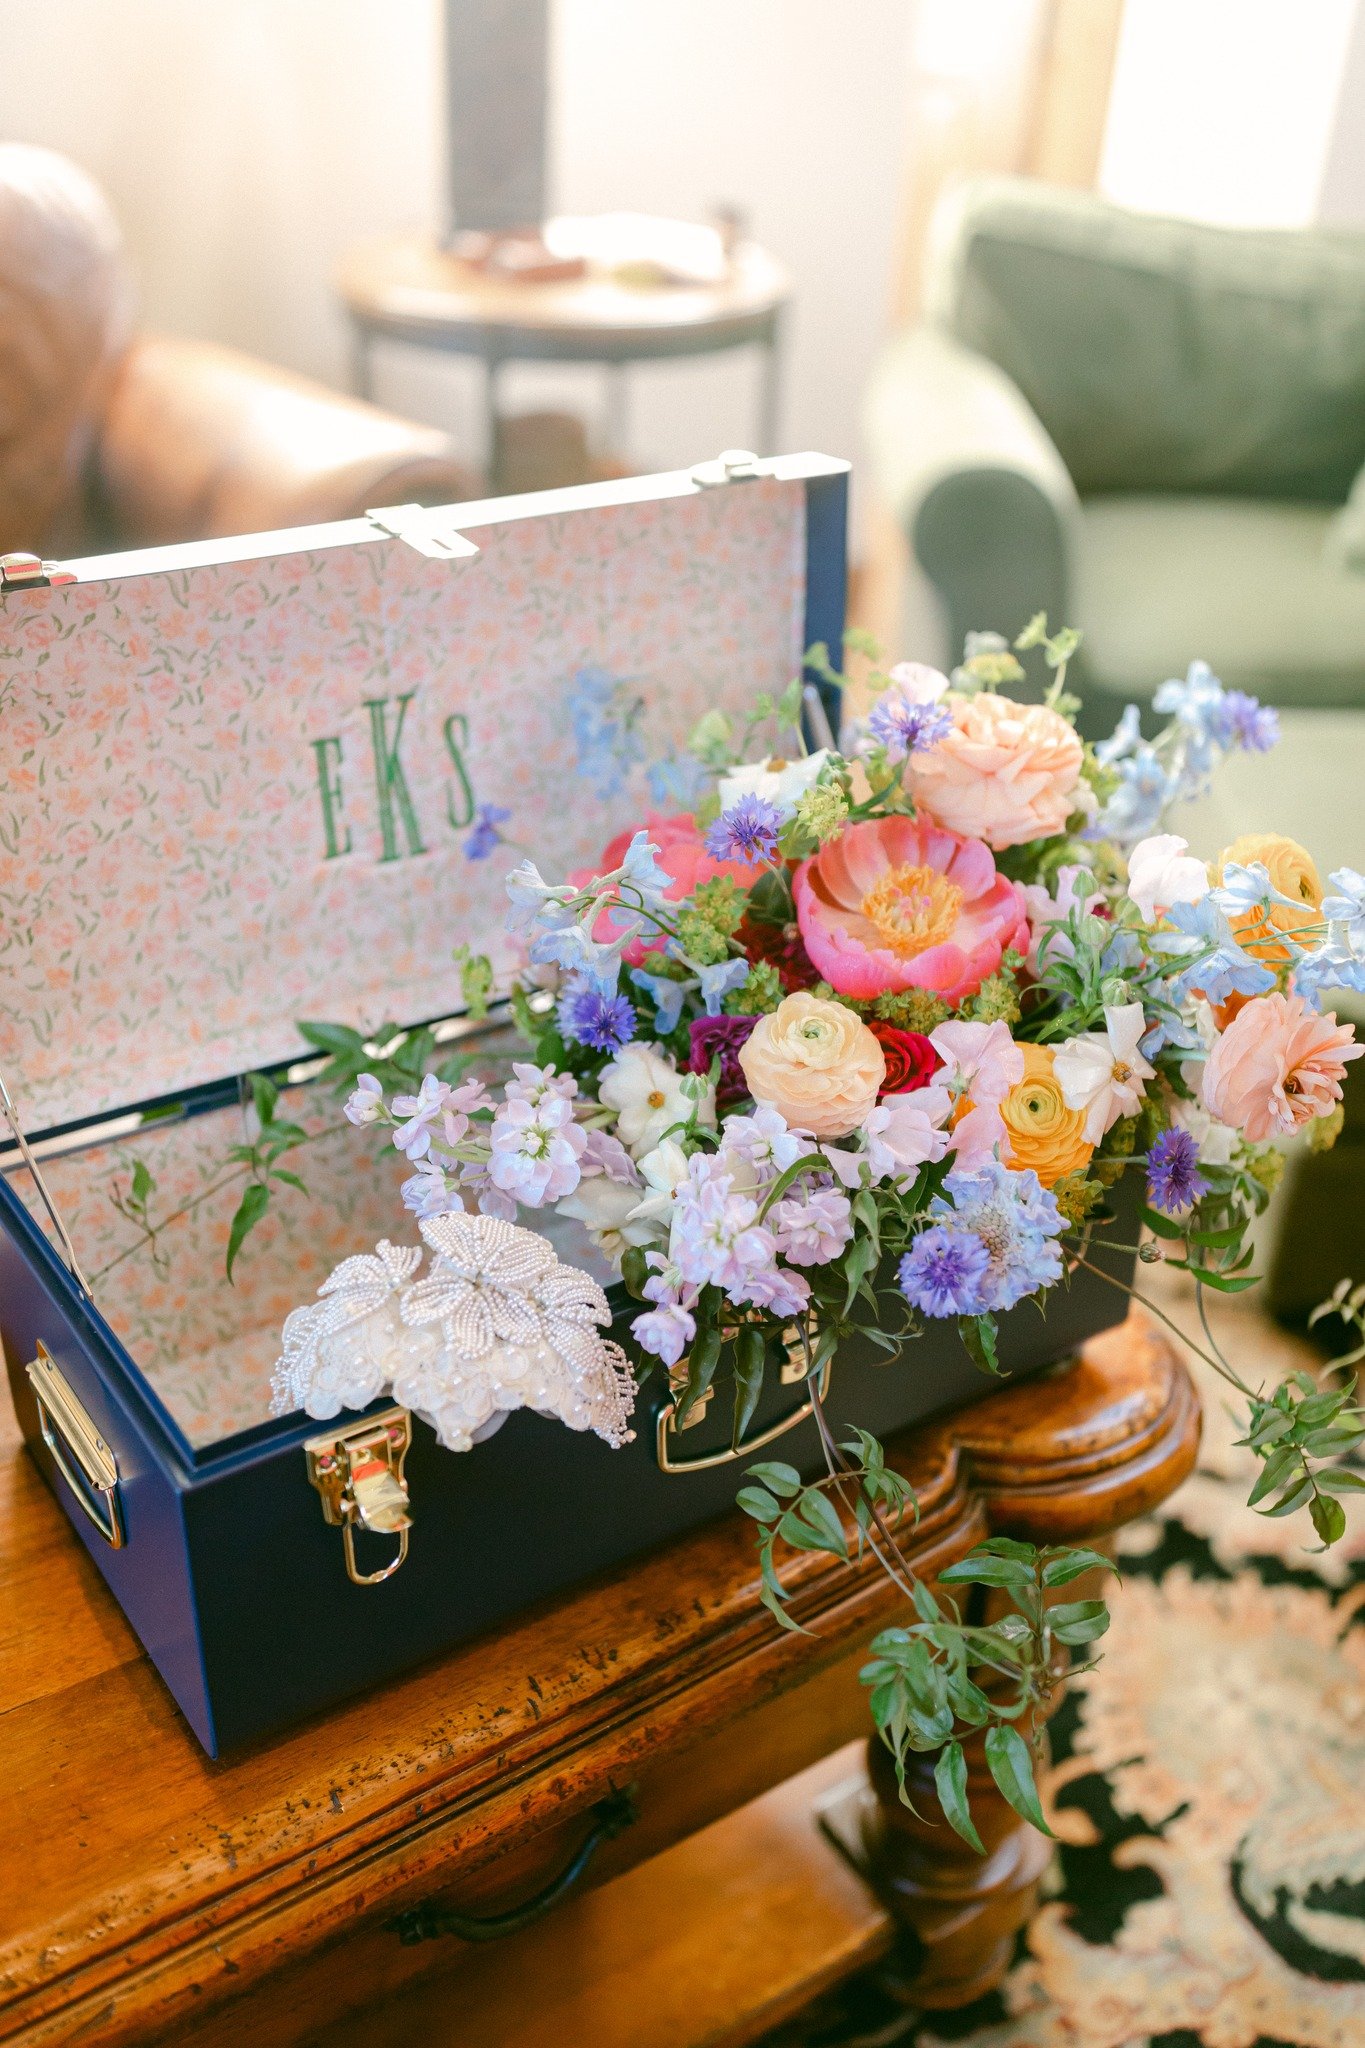 Travel Trunks are totally coming back! and we are definitely okay with it.

Especially when you add pretty flowers for the perfect photo👌

If you're looking for fun and interesting props for your wedding, let us know! We don't just do flowers- we wi